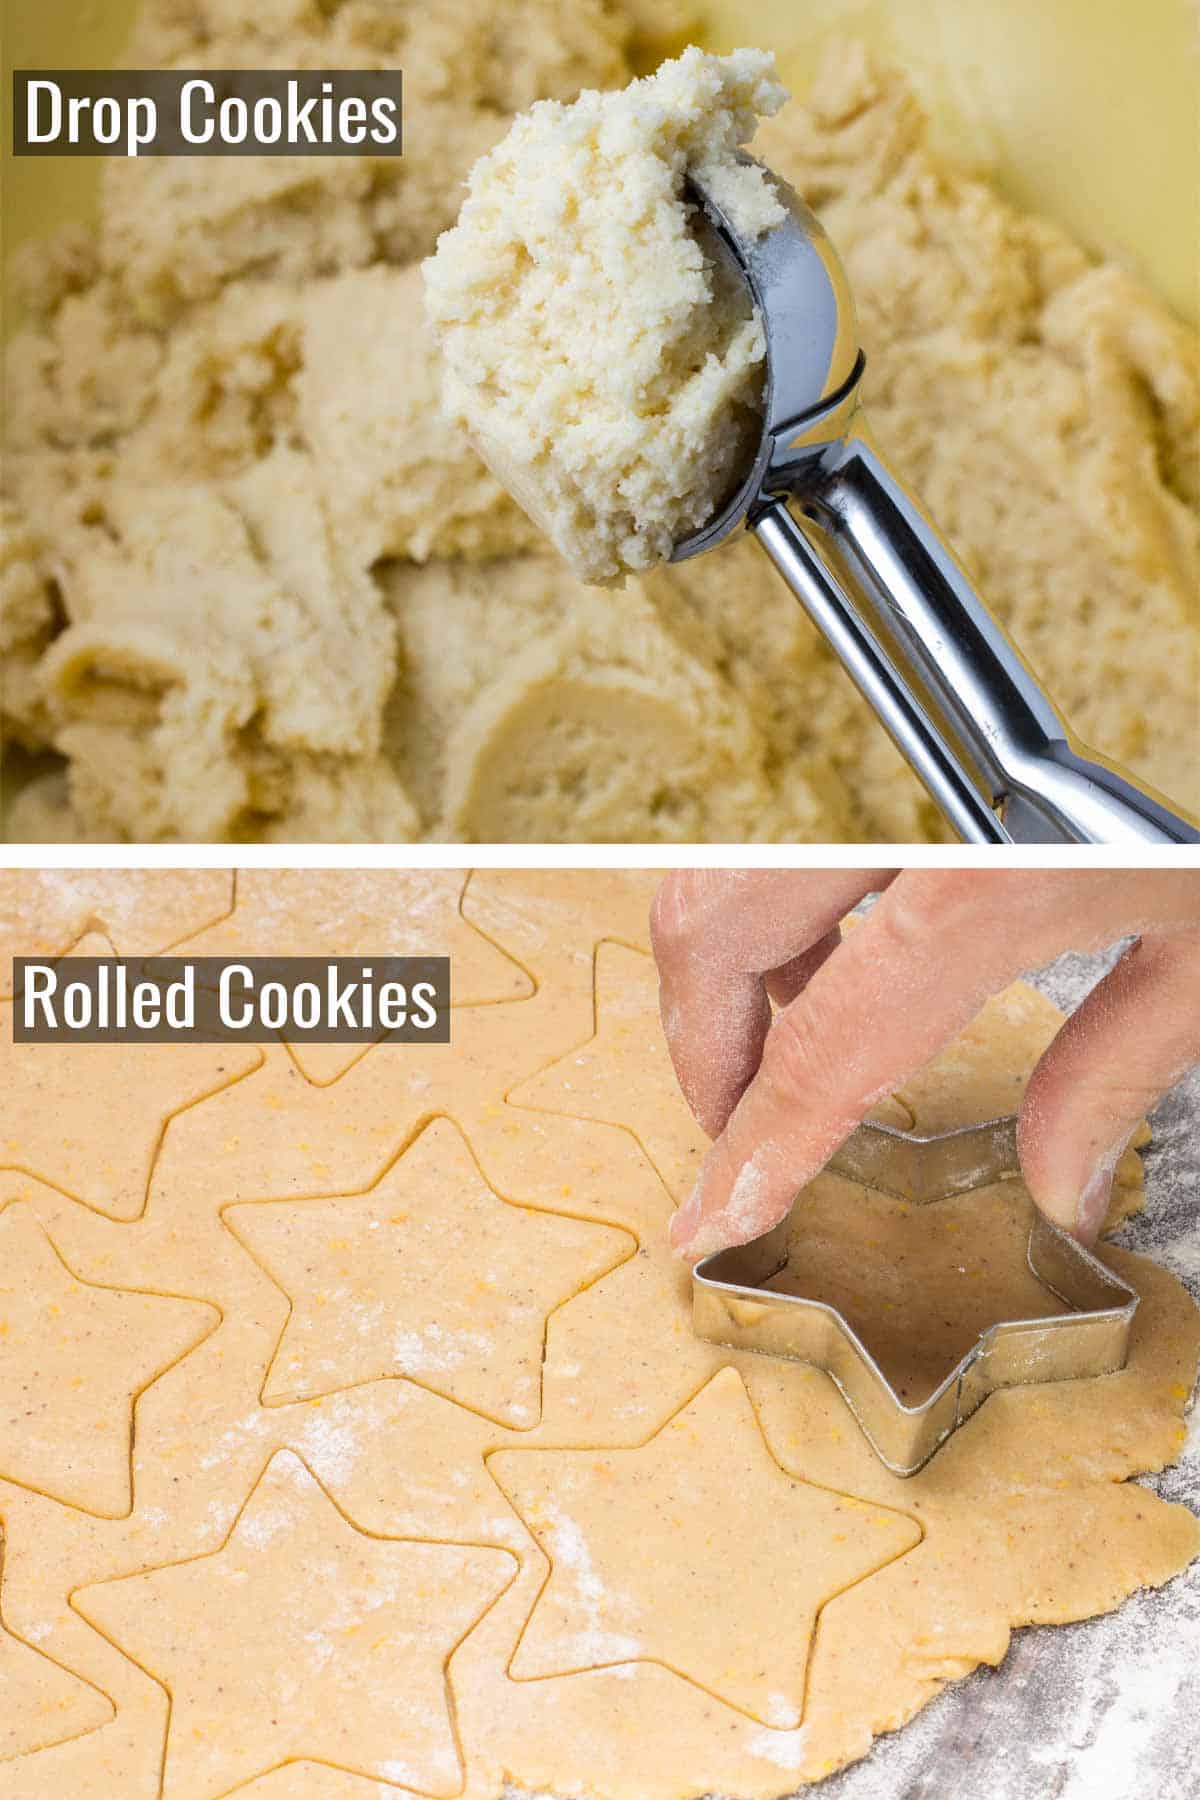 Top half is cookie scoop with cookie dough. Bottom half shows hand cutting cookie dough out with a star-shaped cookie cutter.